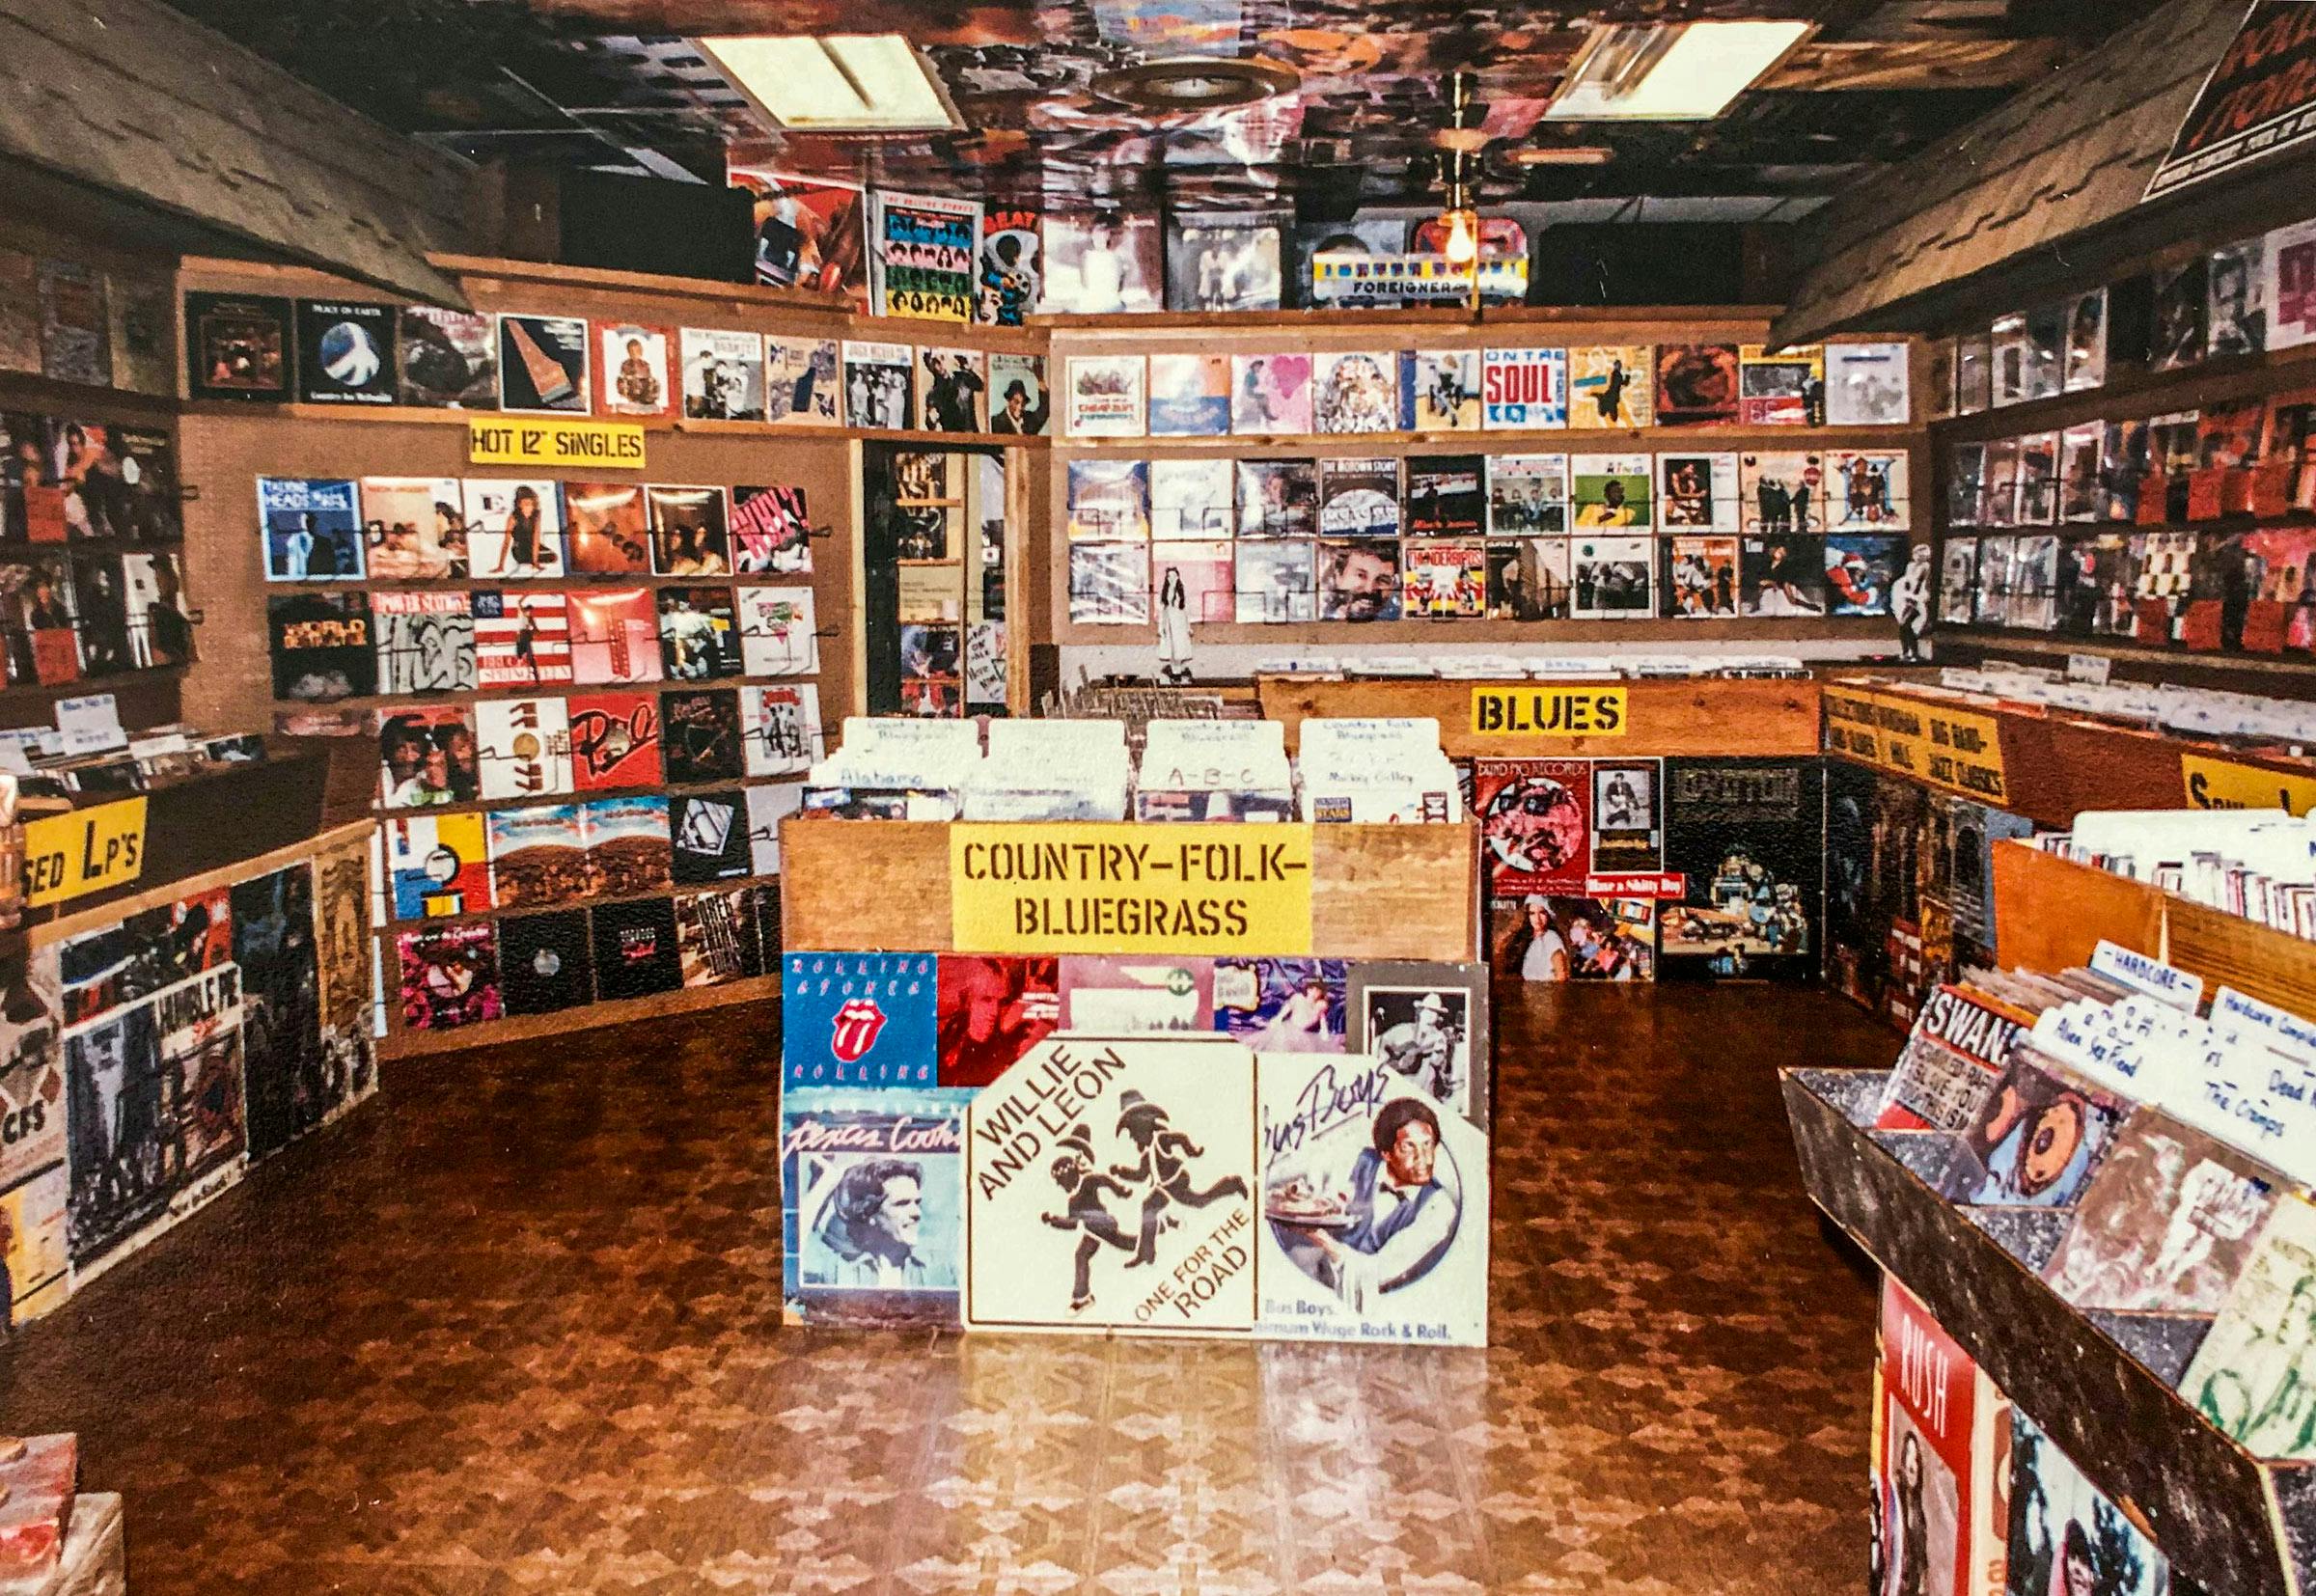 Inside the newly opened second location of Sundance Records in 1985 after the walls, ceiling, and the counter fronts had been decorated by Bobby.